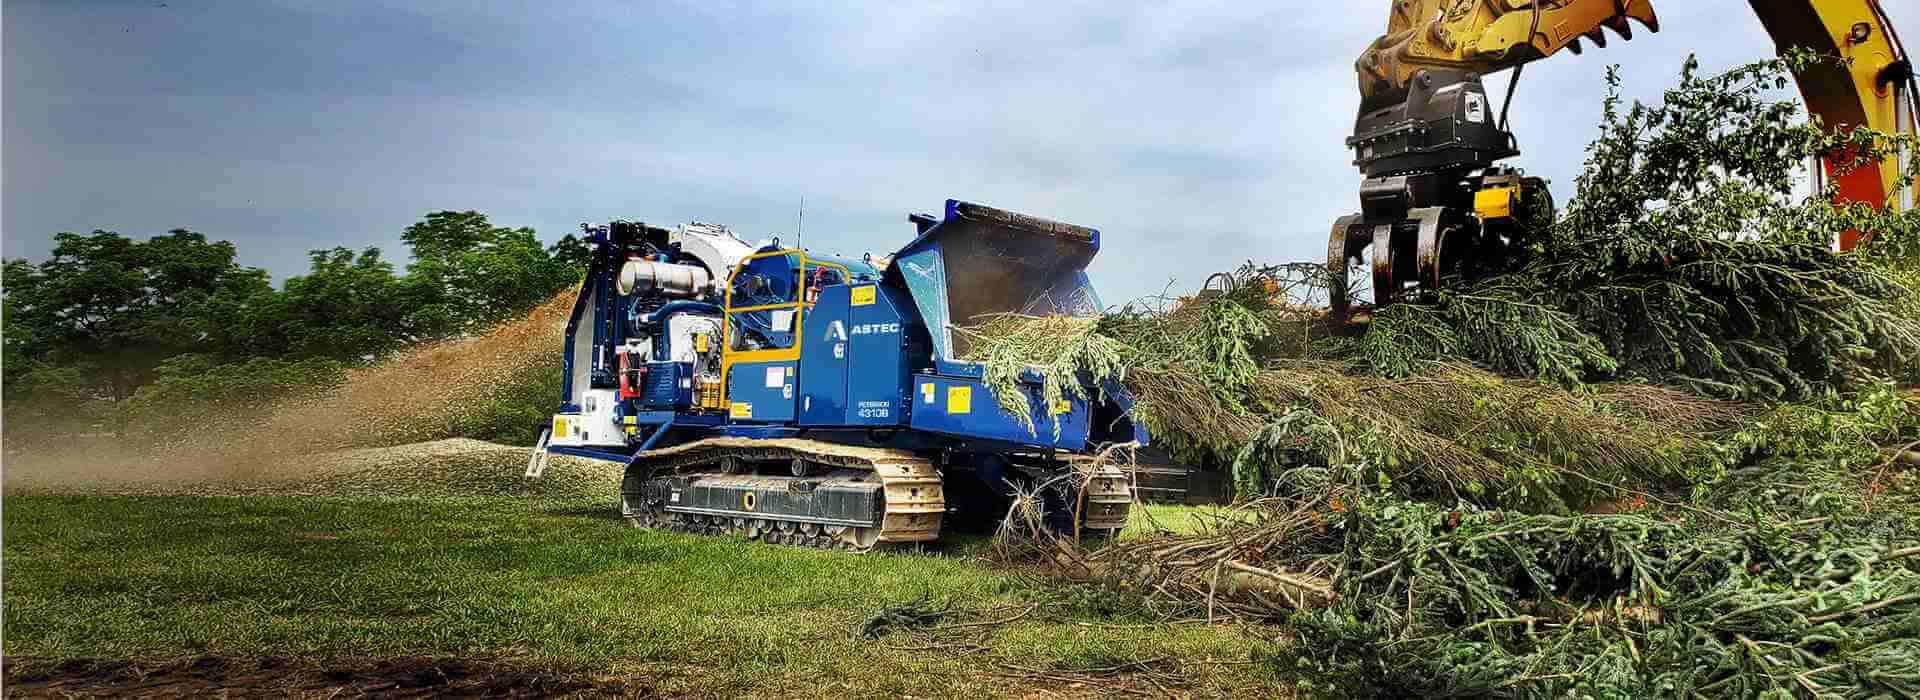 Peterson 4310B Drum Chipper chipping whole trees making microchips and being loaded by a grapple excavator